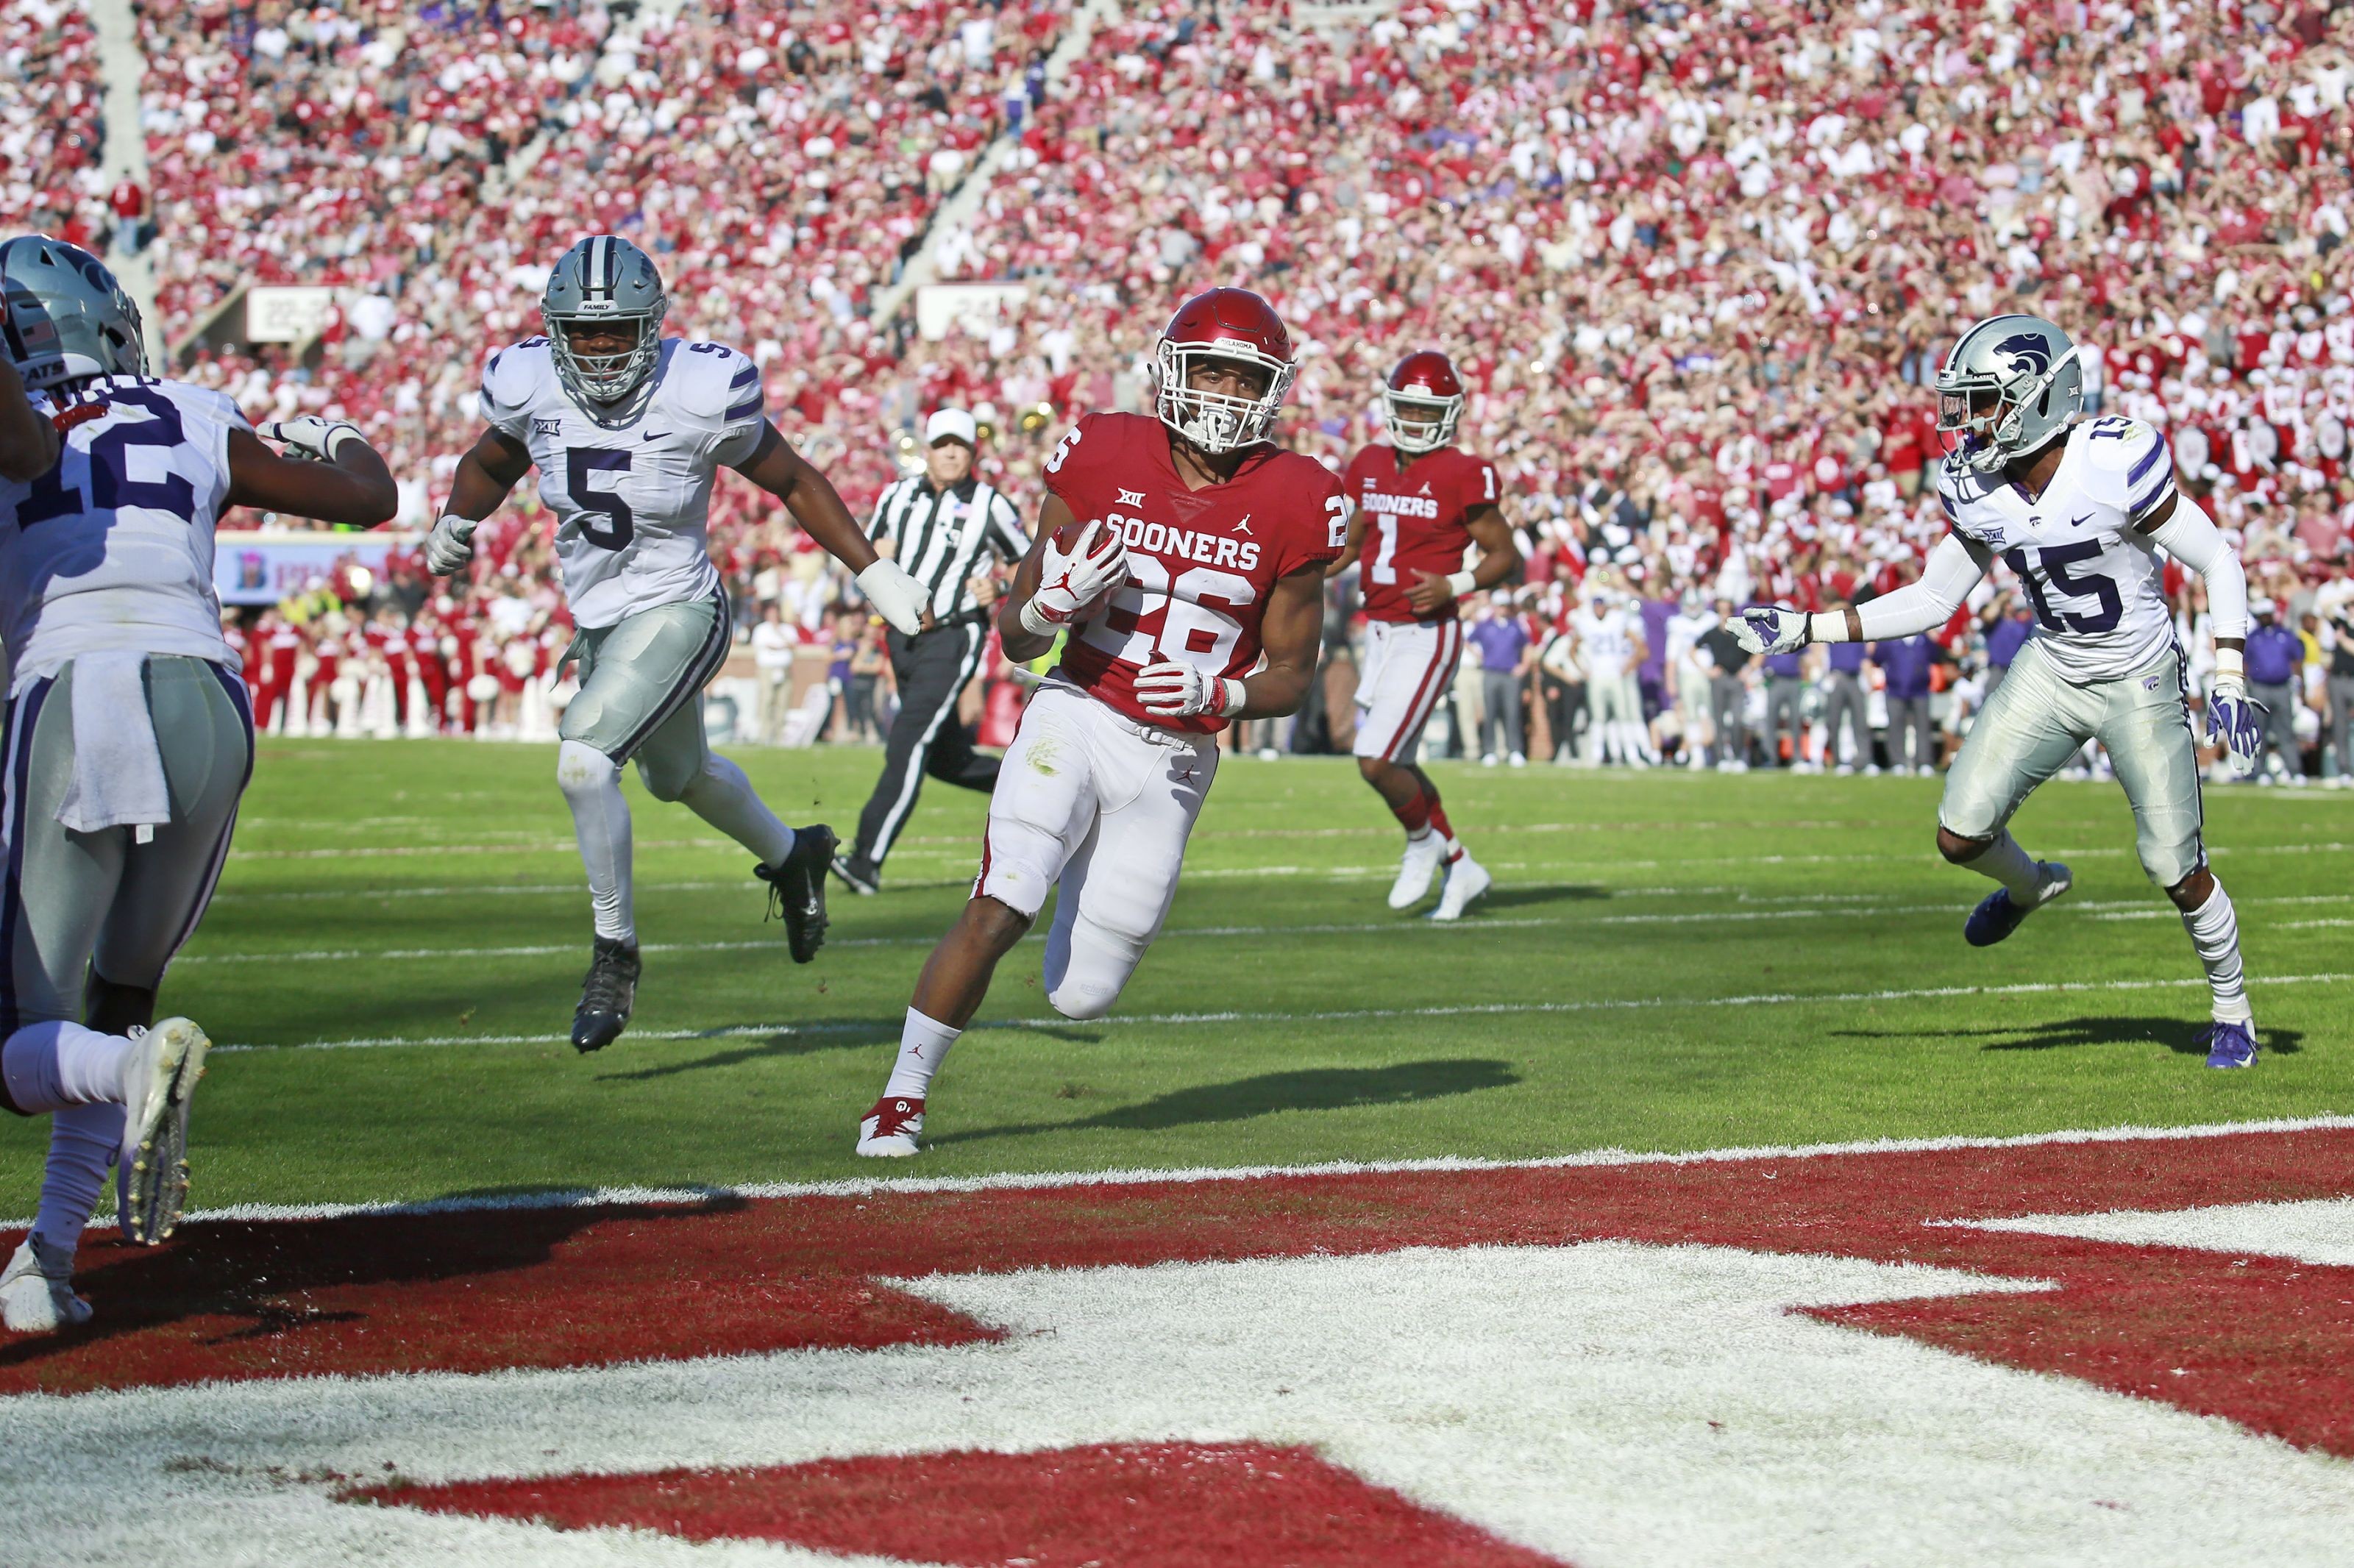 Oklahoma football back where it started, at No. 7 in AP poll